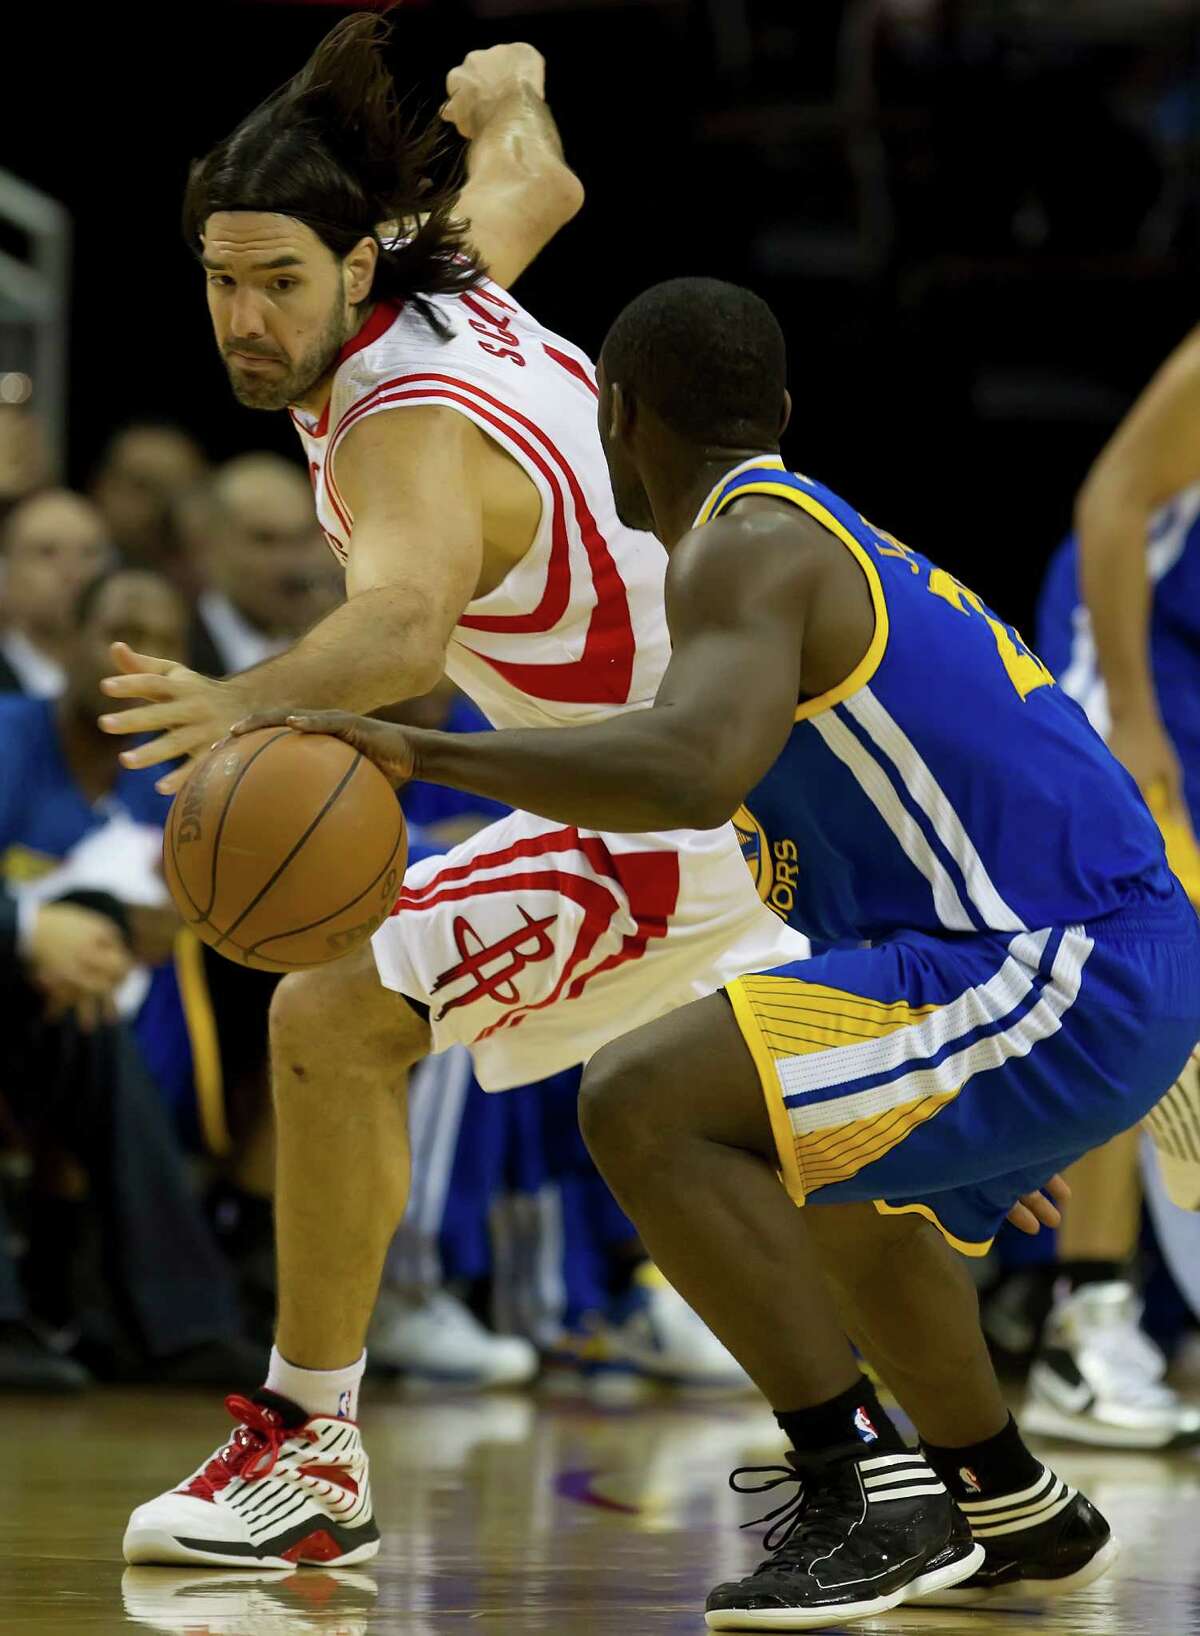 Luis Scola (4) of the Houston Rockets tries to steal the ball from Charles Jenkins (22) of the Golden State Warriors on Saturday, April 21, 2012, in Houston, Texas. (George Bridges/MCT)